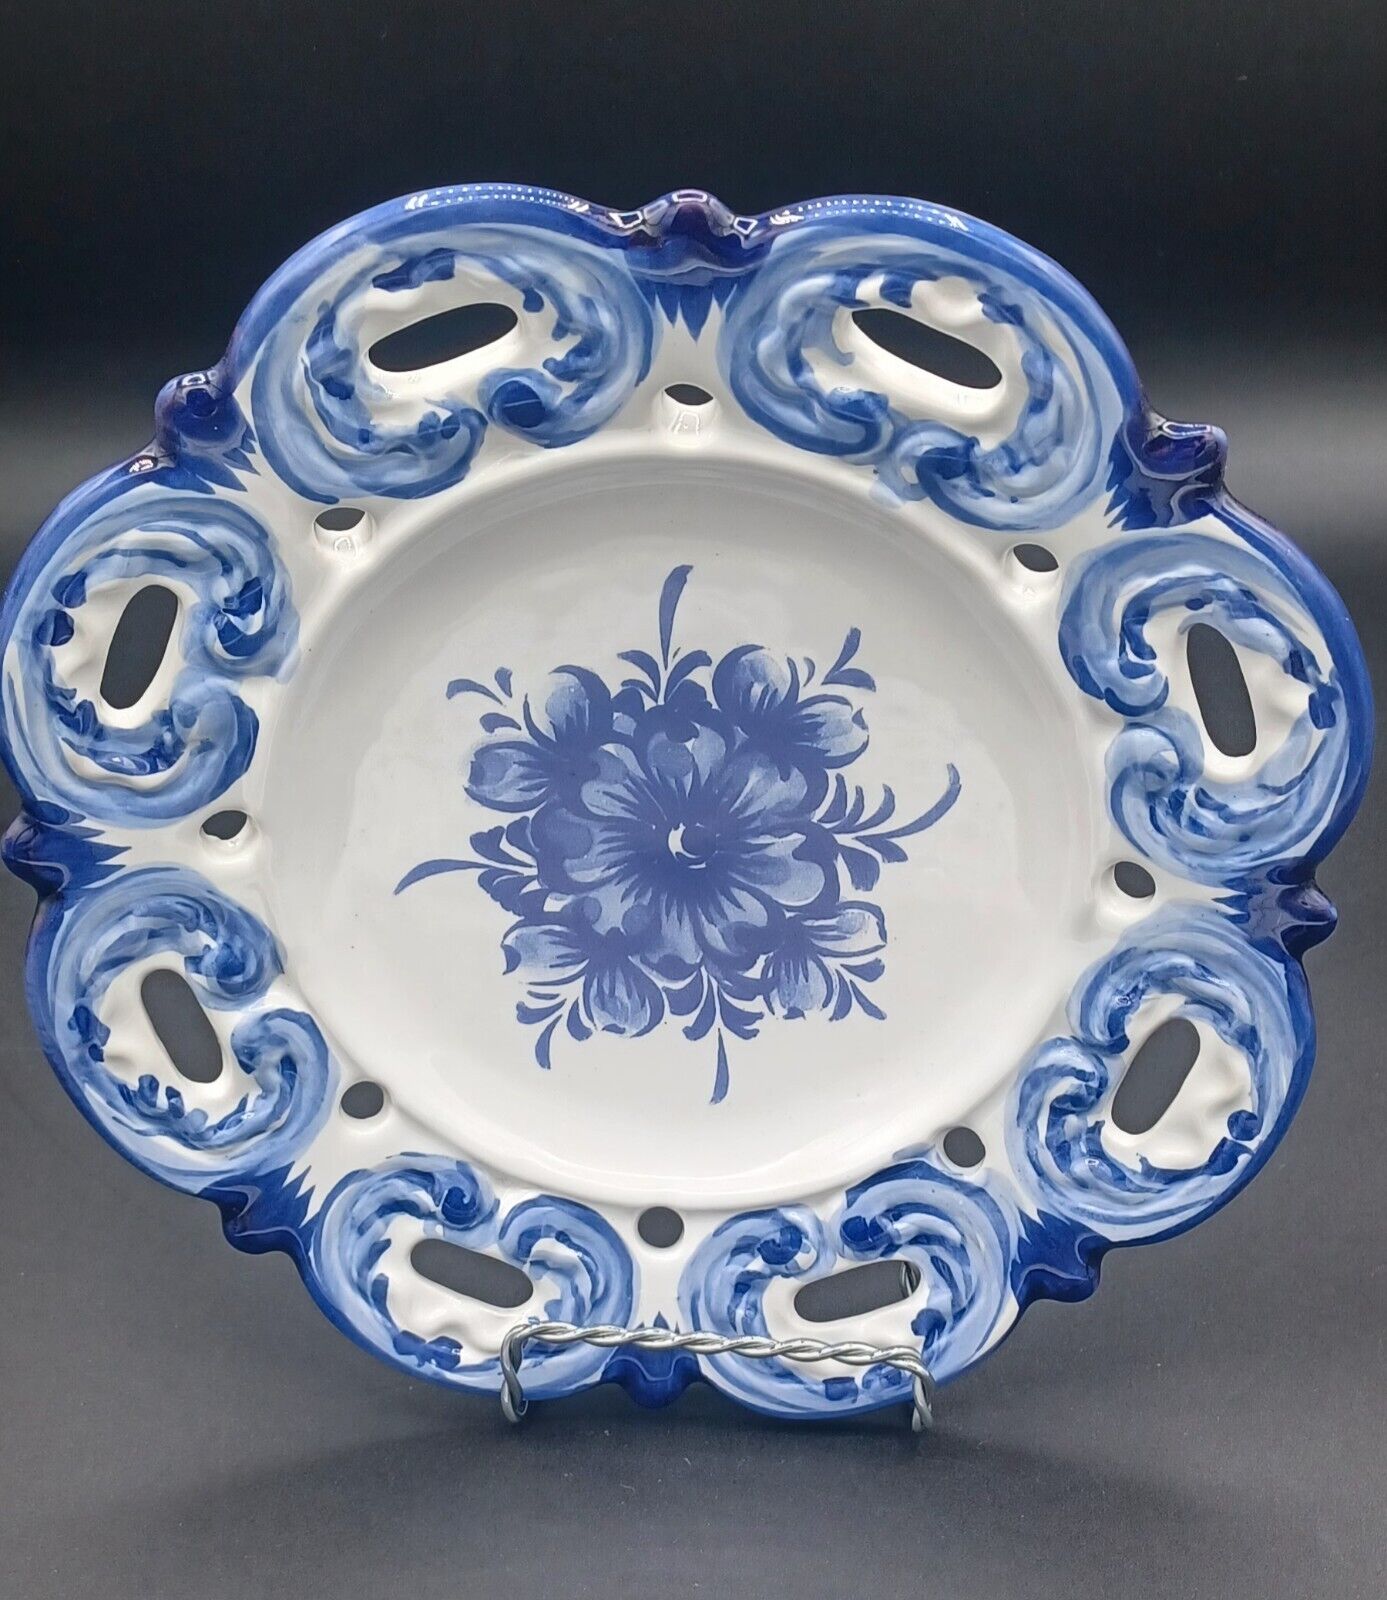 Vintage Vestal Alcobaca Blue and White Reticulated Slotted Plate Portugal #1047